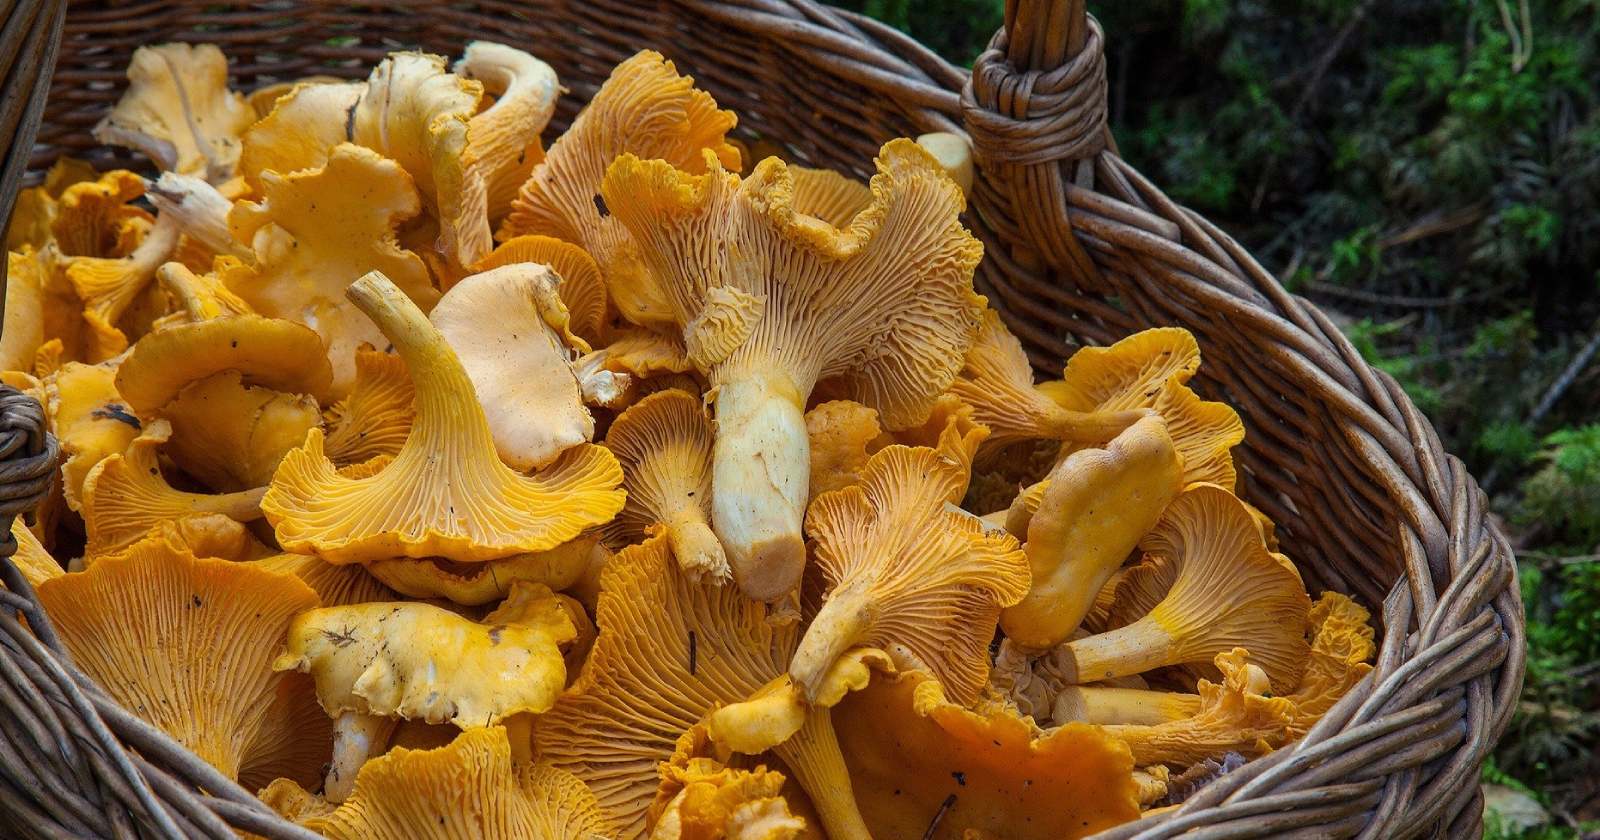 How To Store Chanterelle Mushrooms